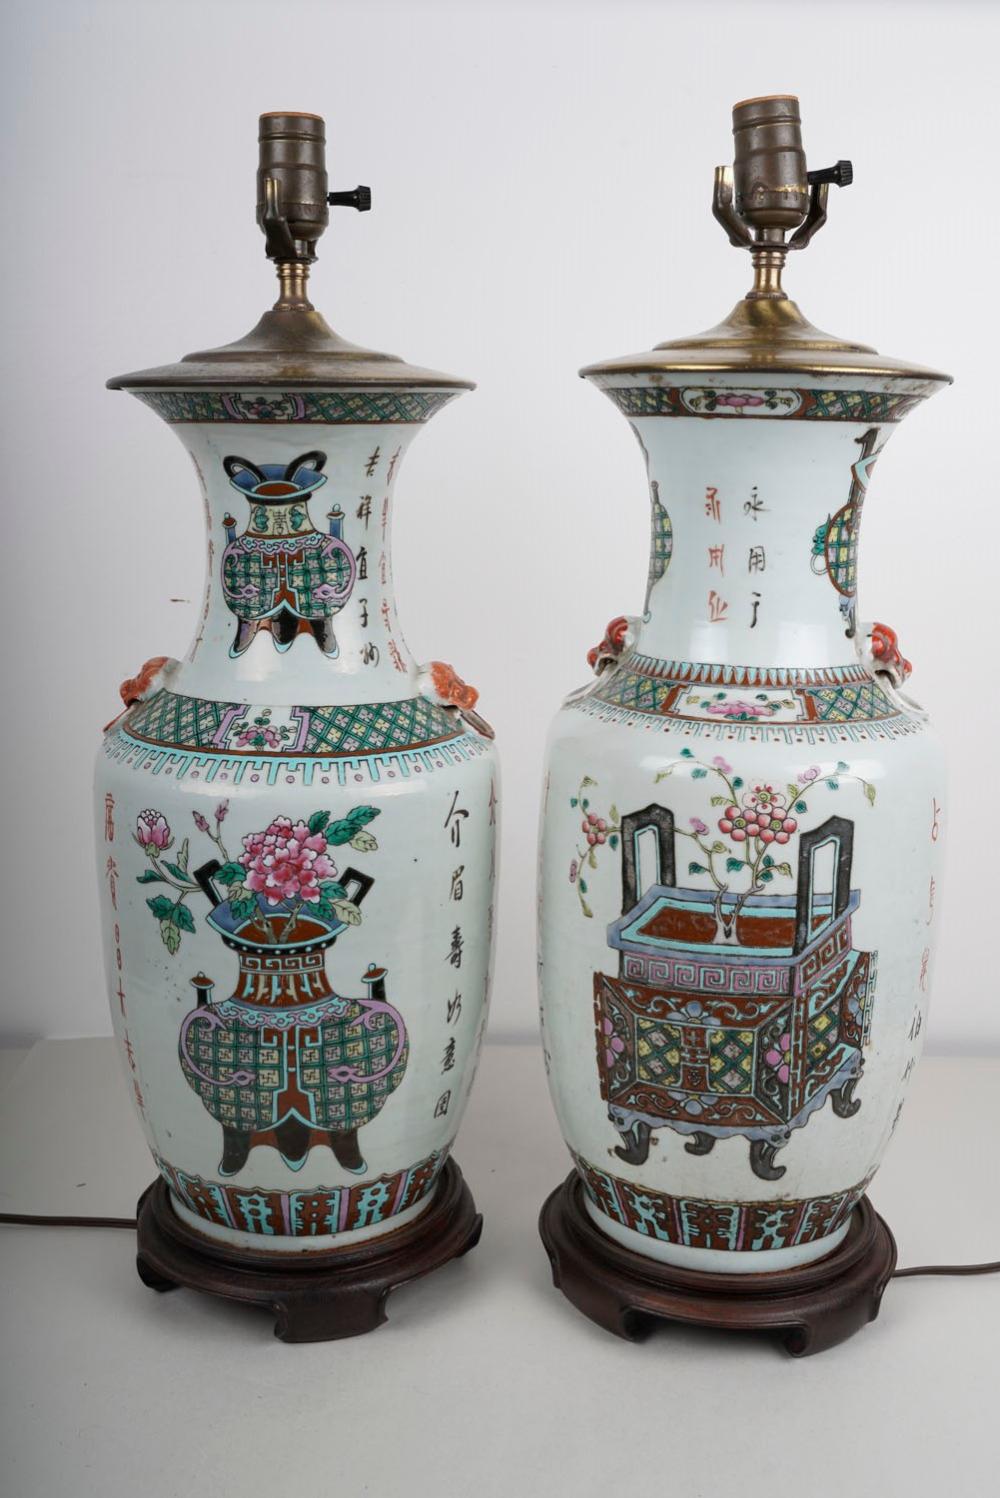 PAIR OF CHINESE PORCELAIN VASESmounted